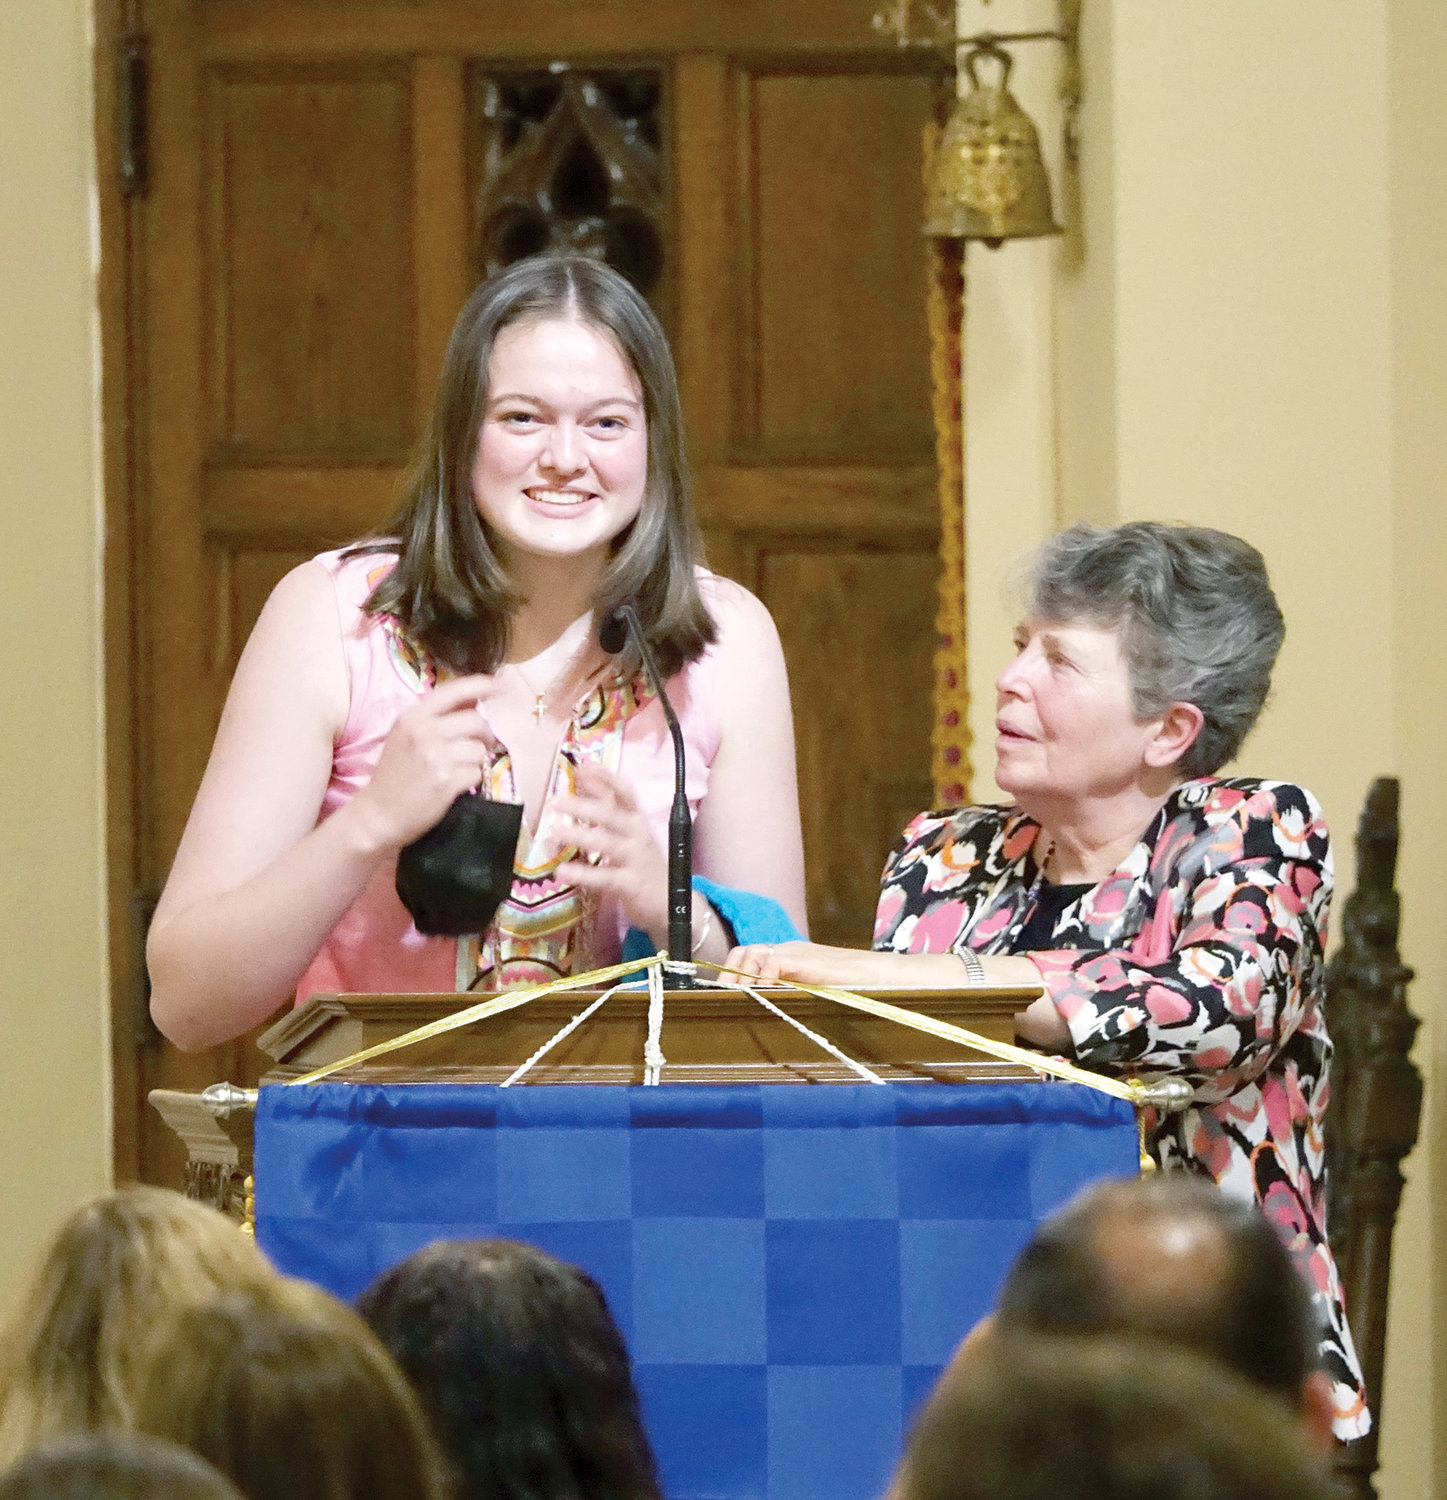 Sophia Soropoulos, a junior at Mamaroneck High School, receives a certificate and other award items from Sister Suzanne Duzen, SS.C.M., the parish’s director of religious education. The awards were conferred by the Sisters of Saints Cyril and Methodius, whose motherhouse is in Danville, Pa. Four sisters from the congregation’s leadership committee traveled to help Sister Suzanne host the ceremony.